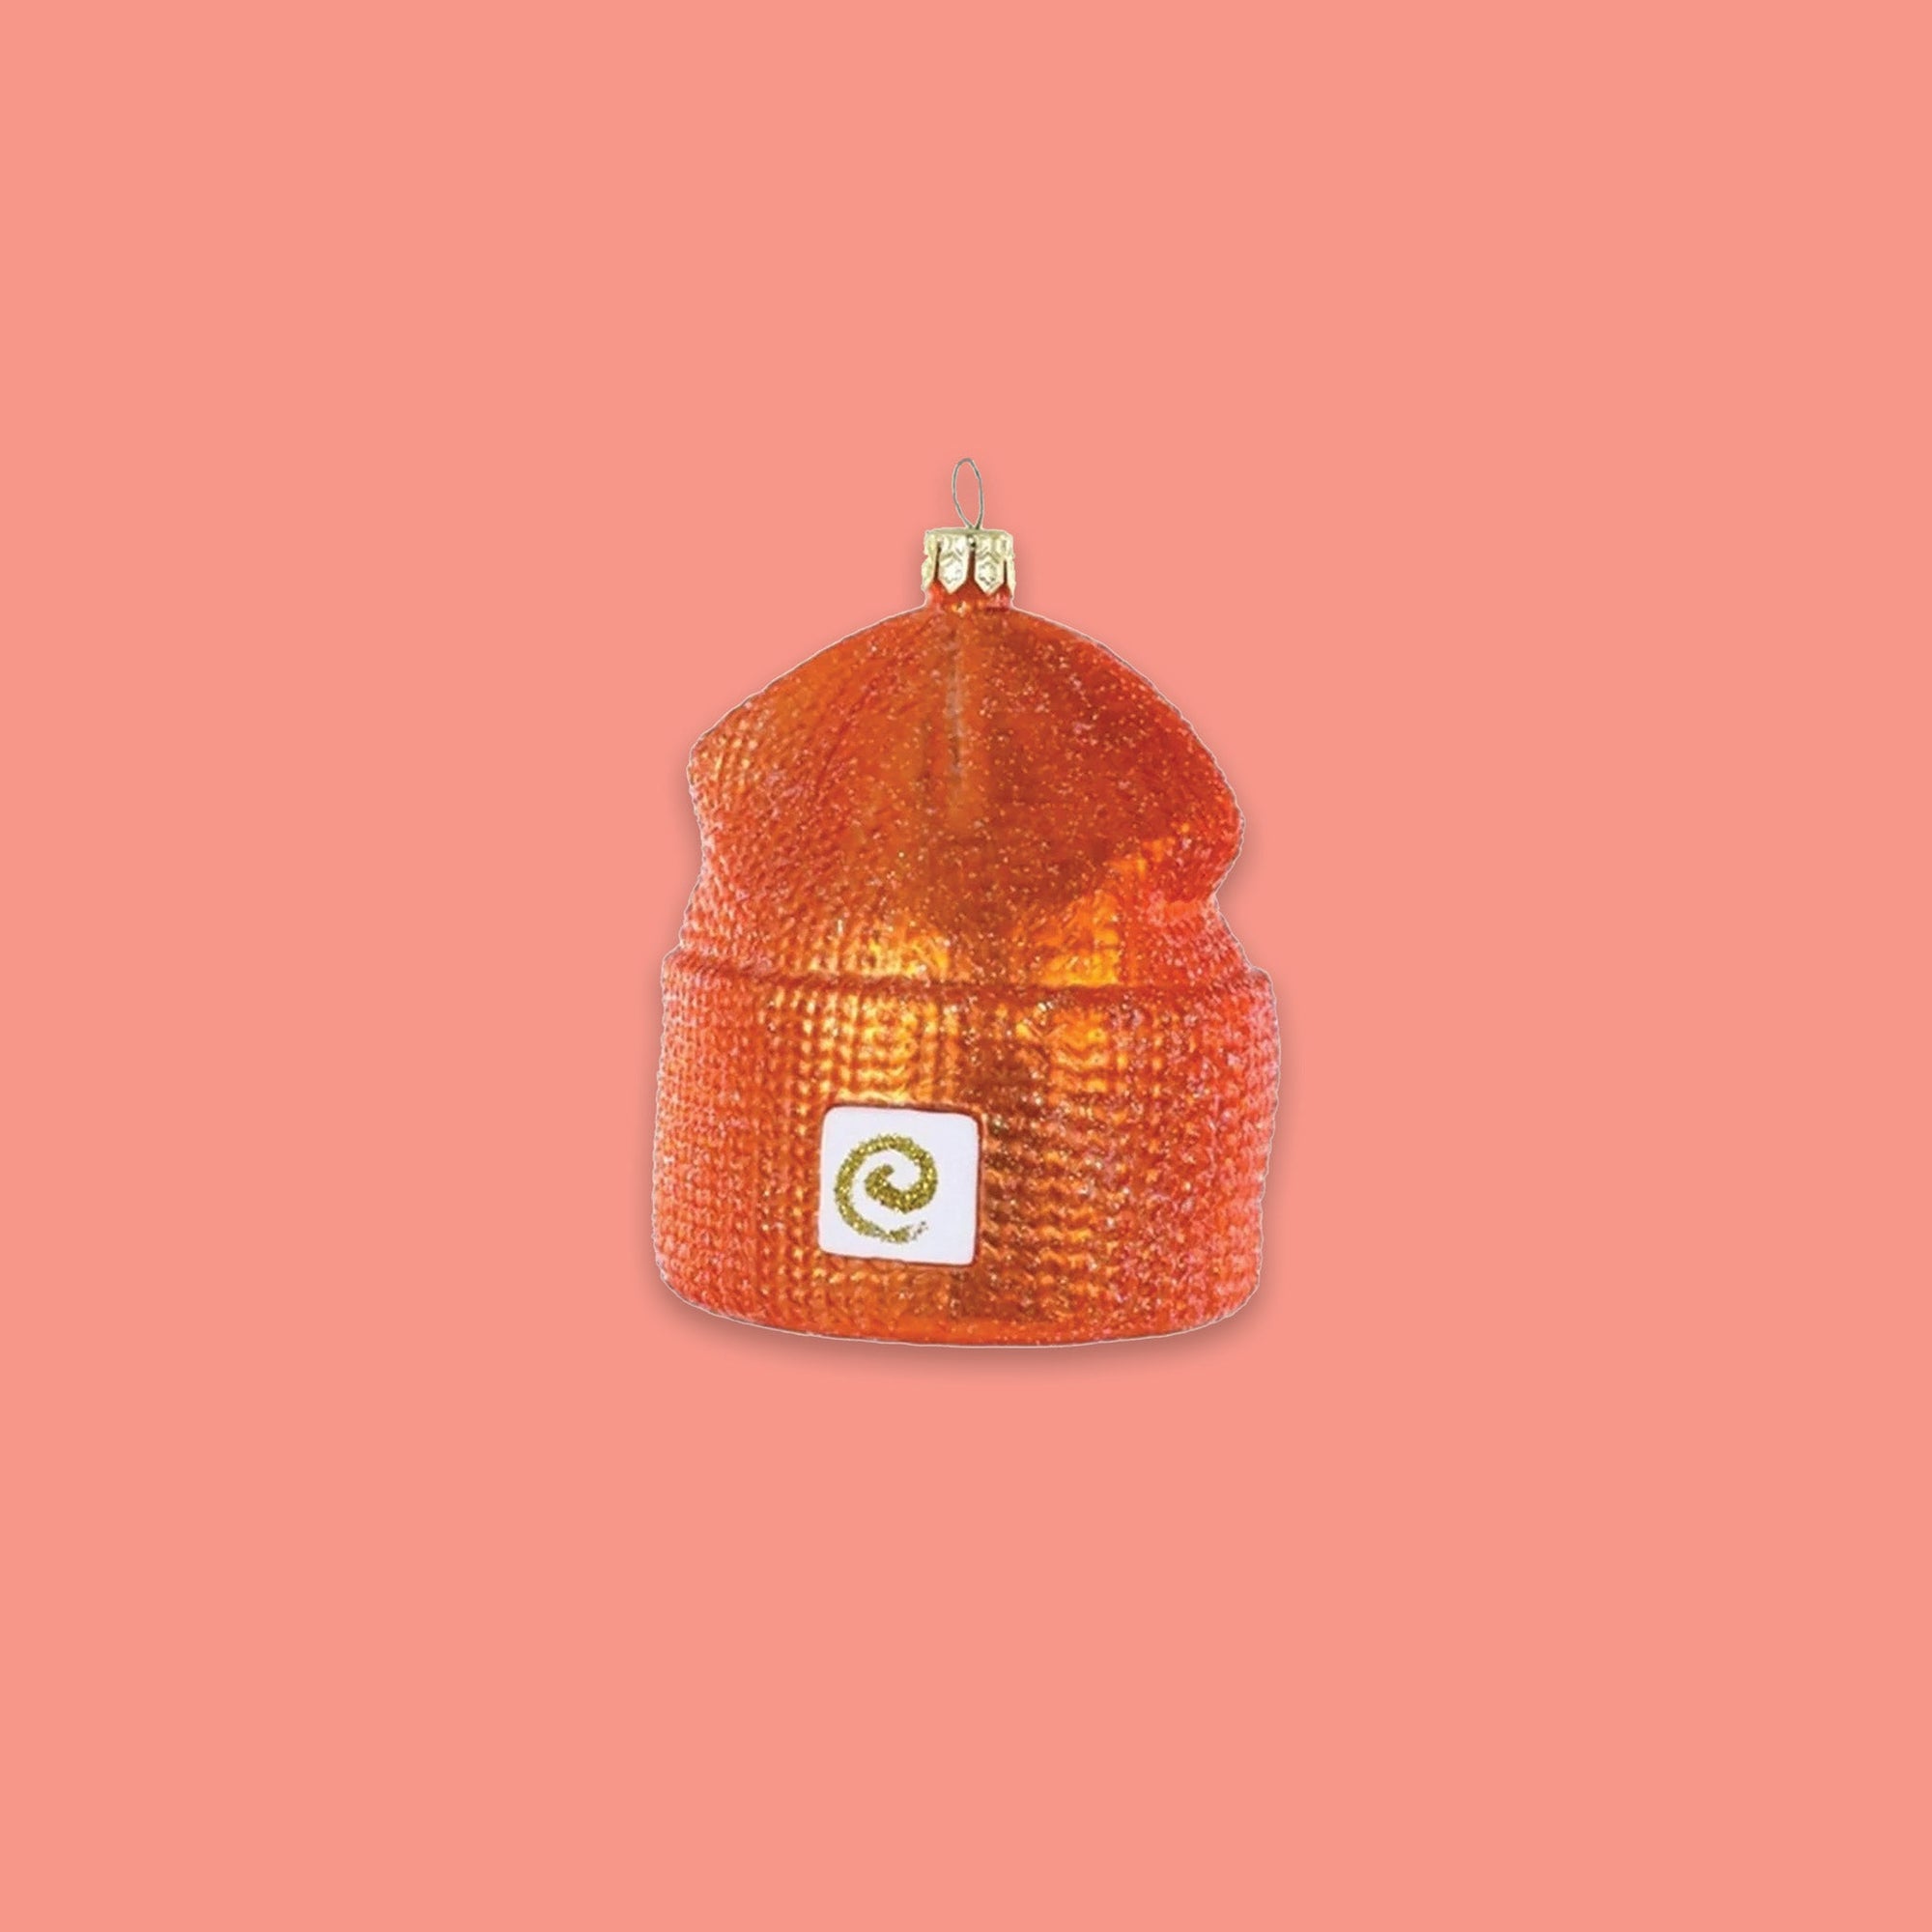 On a coral pink background sits a beanie ornament. This Carhartt inspired glass beanie ornament is orange.